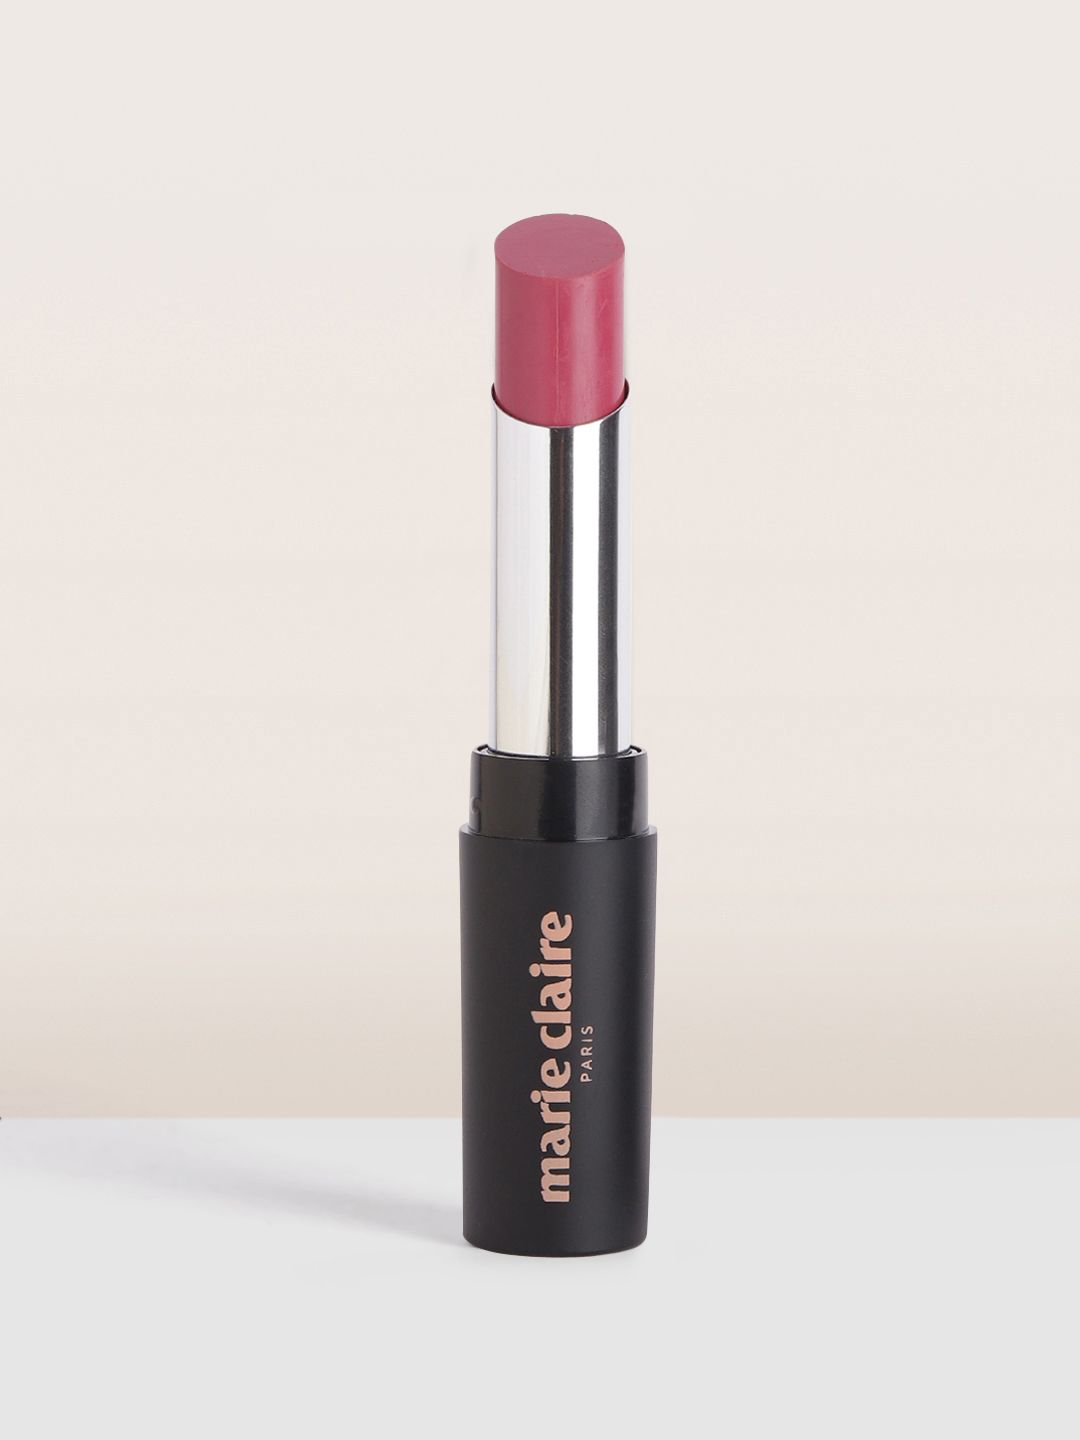 Marie Claire Matte my Match Lipstick - Candy Caramel Price in India